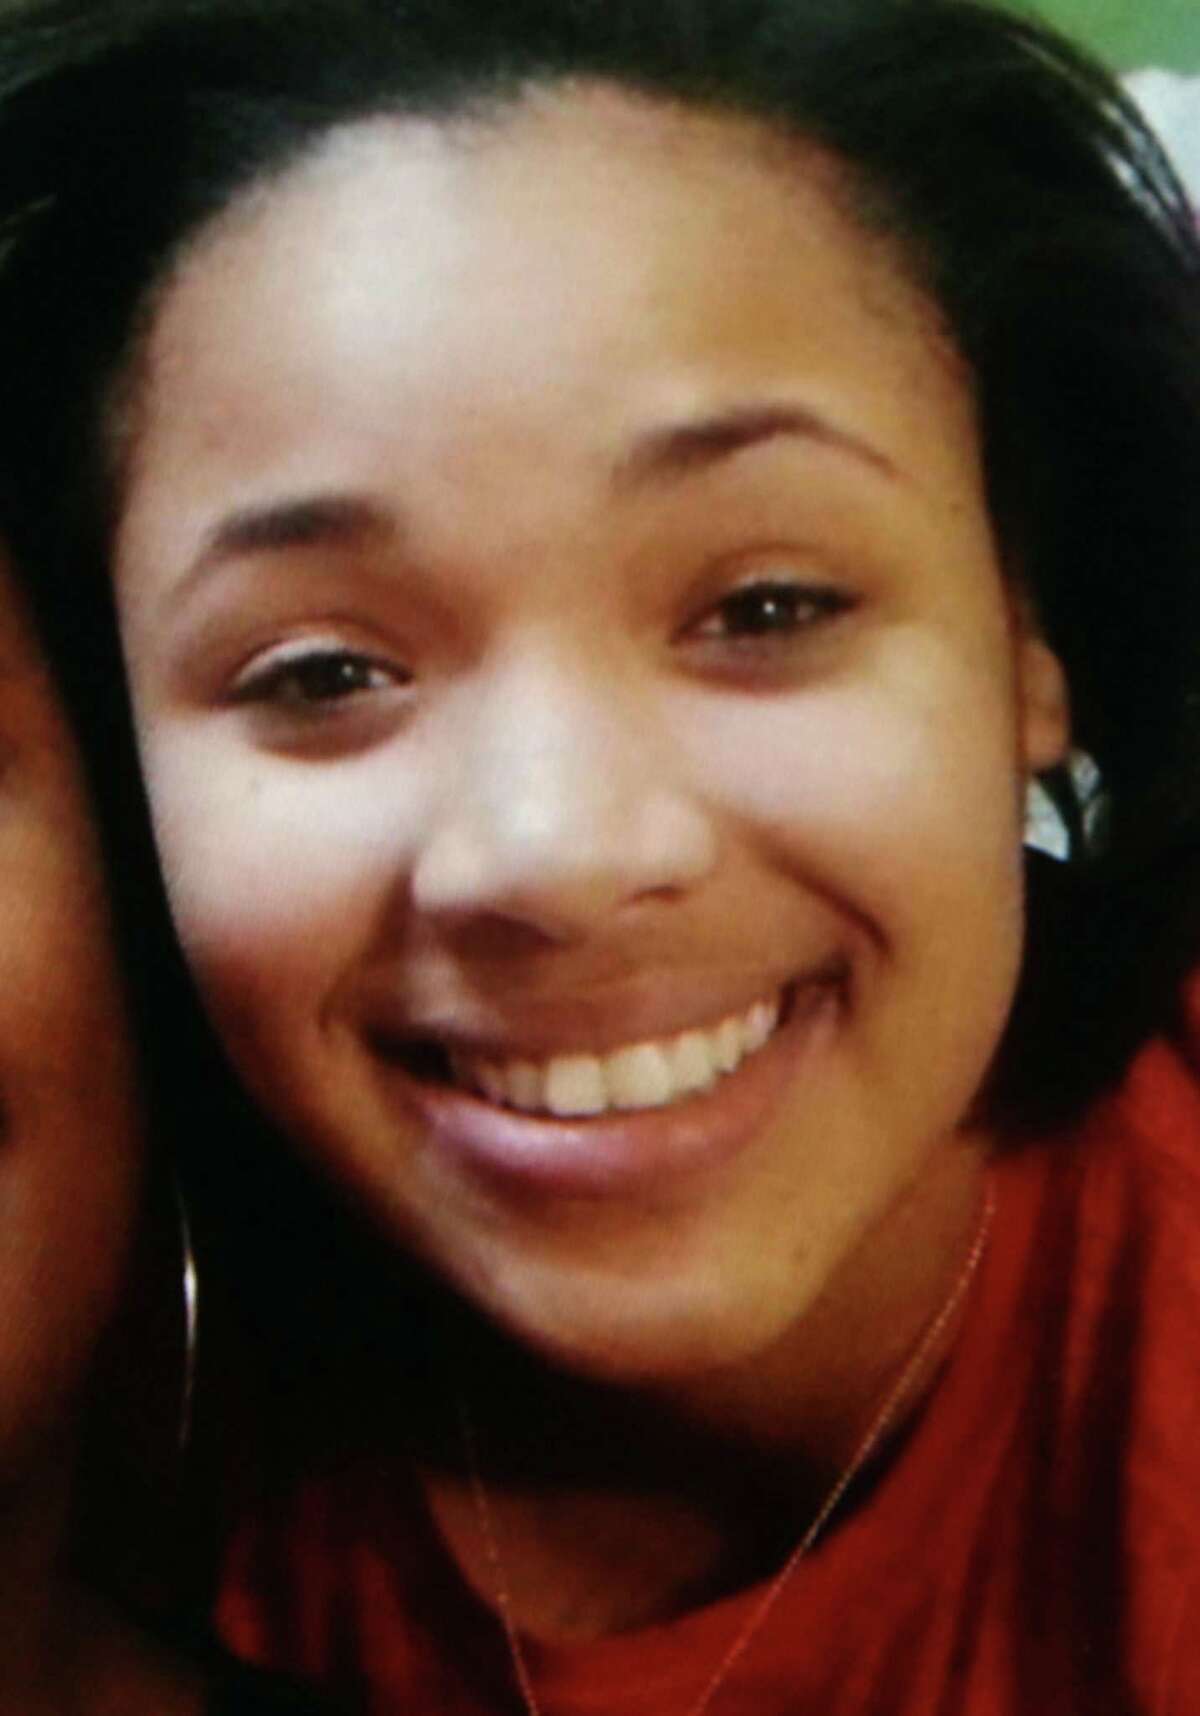 Hadiya Pendleton, above, was shot and killed in Chicago in 2013 when a gunman opened fire on a group of students. Her death inspired her friends to launch the Wear Orange campaign to mark National Gun Violence Awareness Day on June 2, which is her birthday.